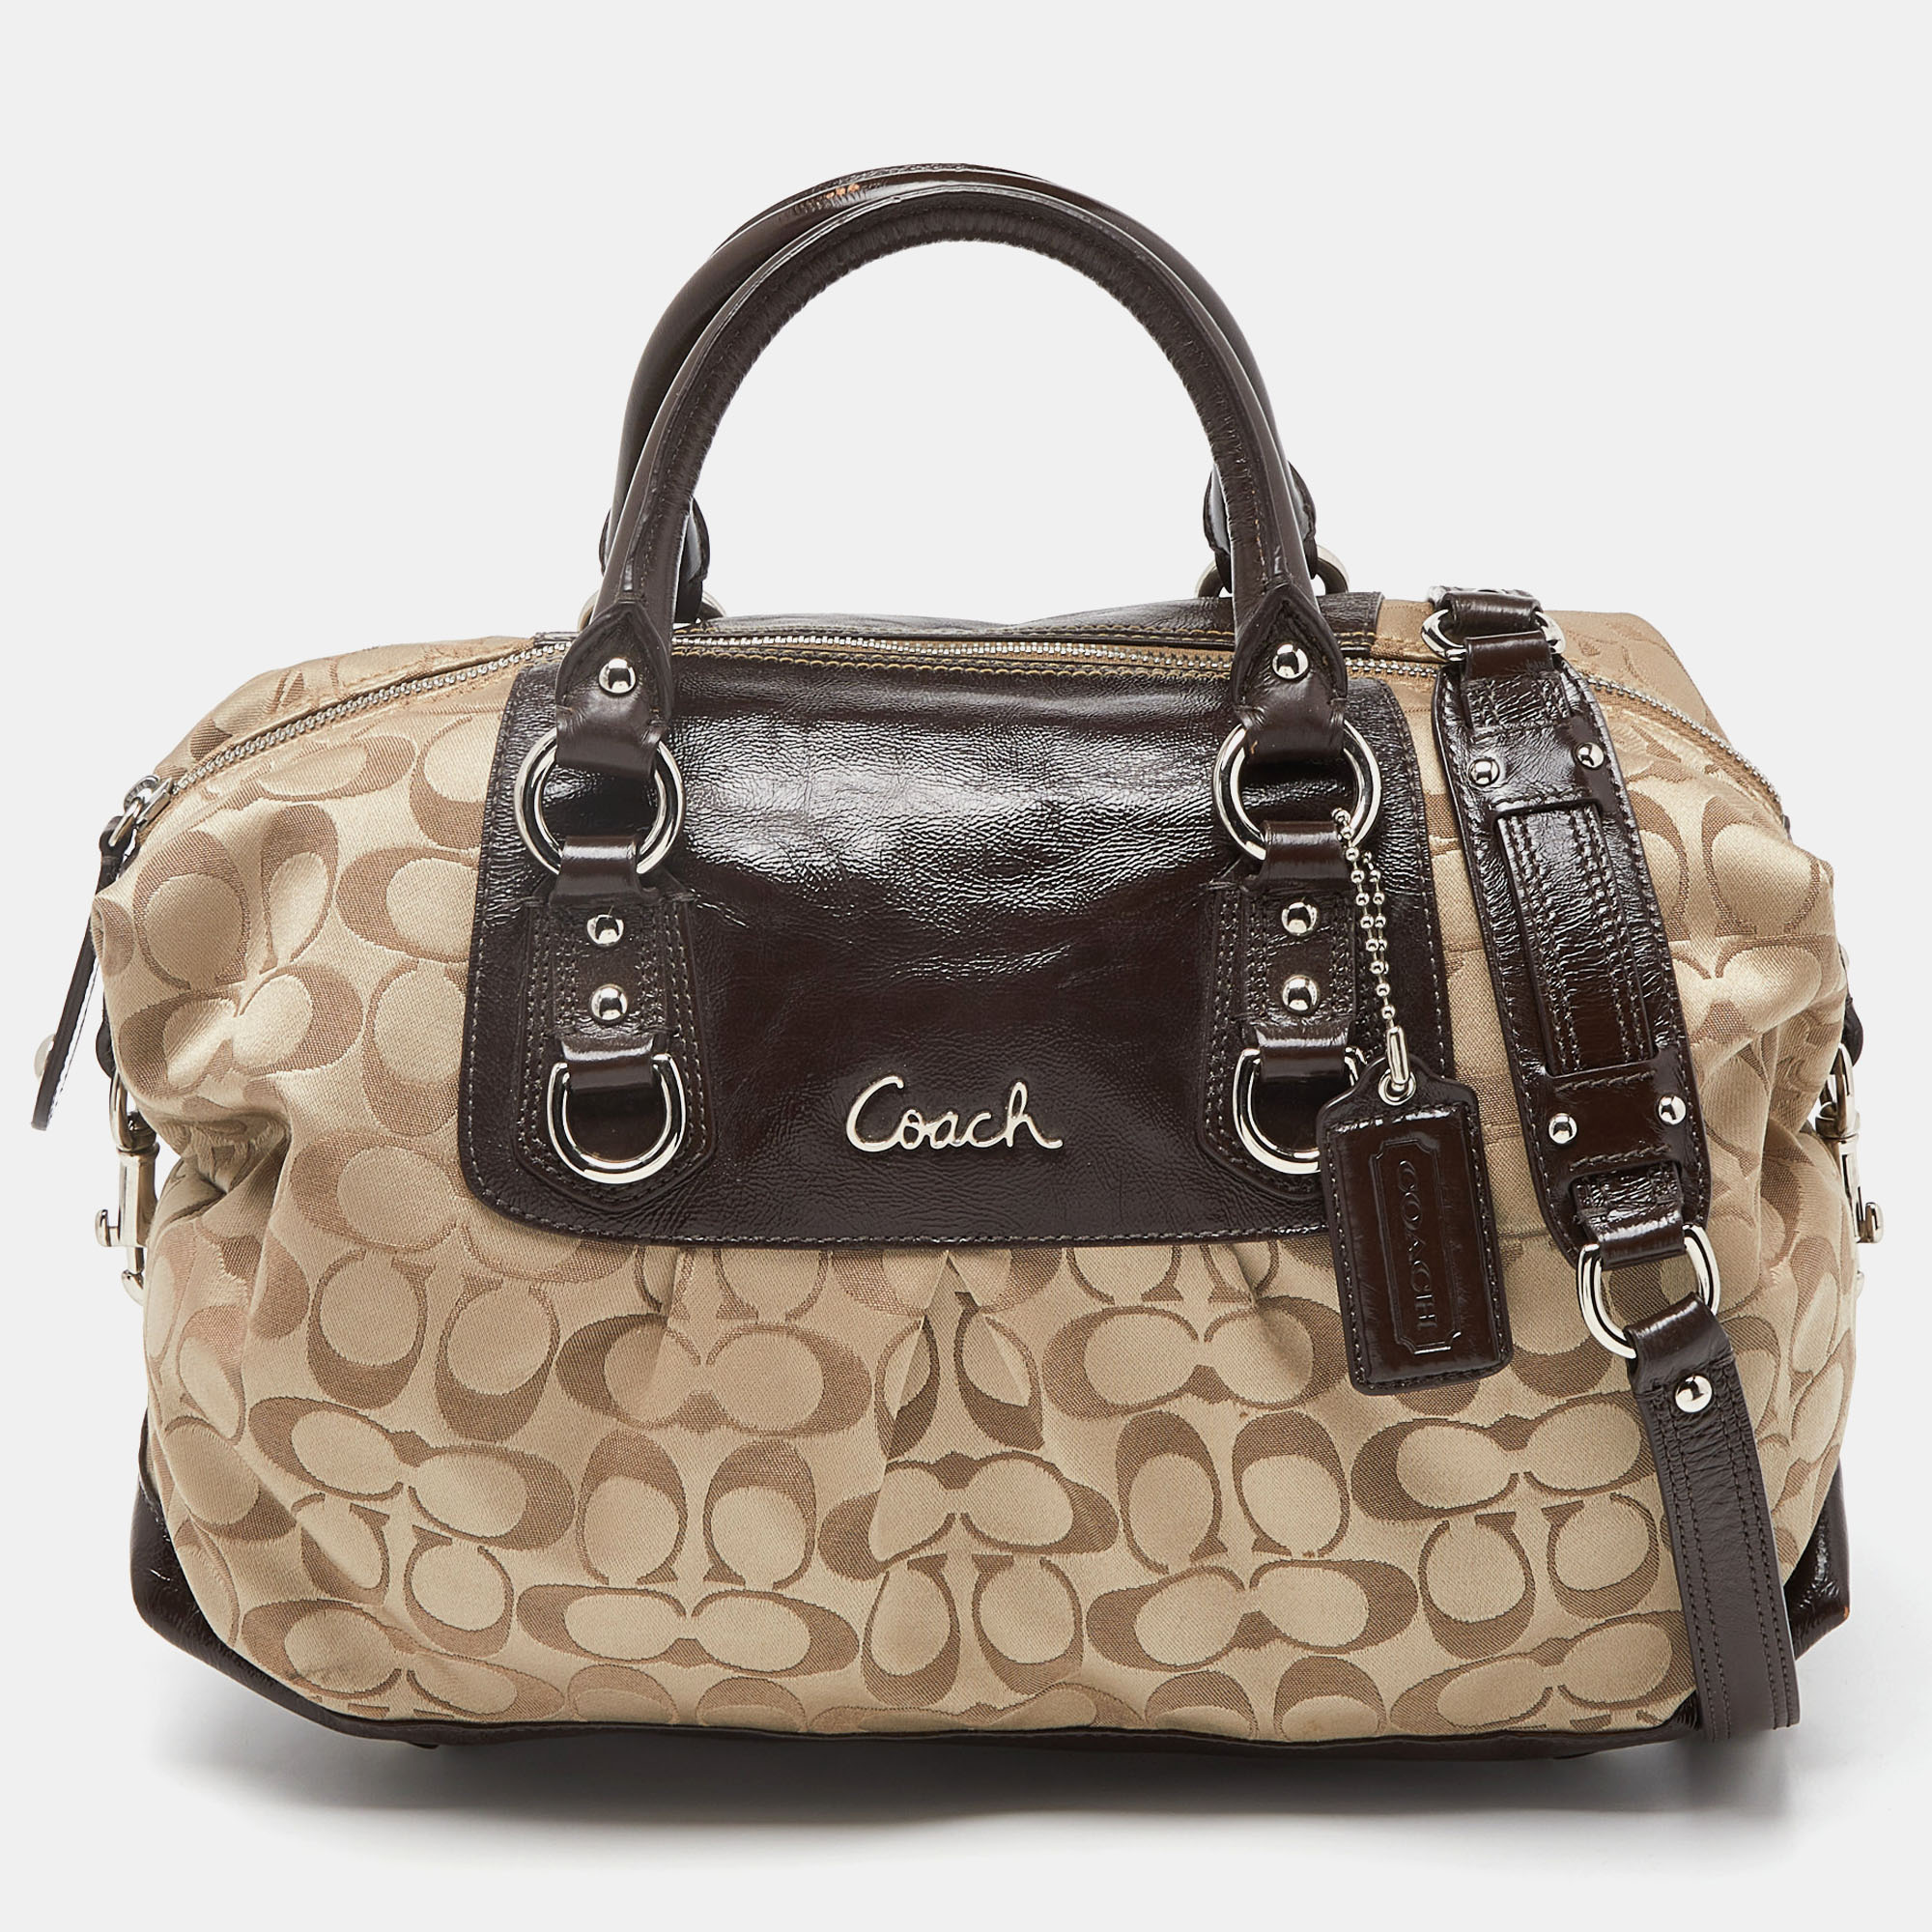 

Coach Beige/Brown Signature Fabric and Patent Leather Ashley Bag